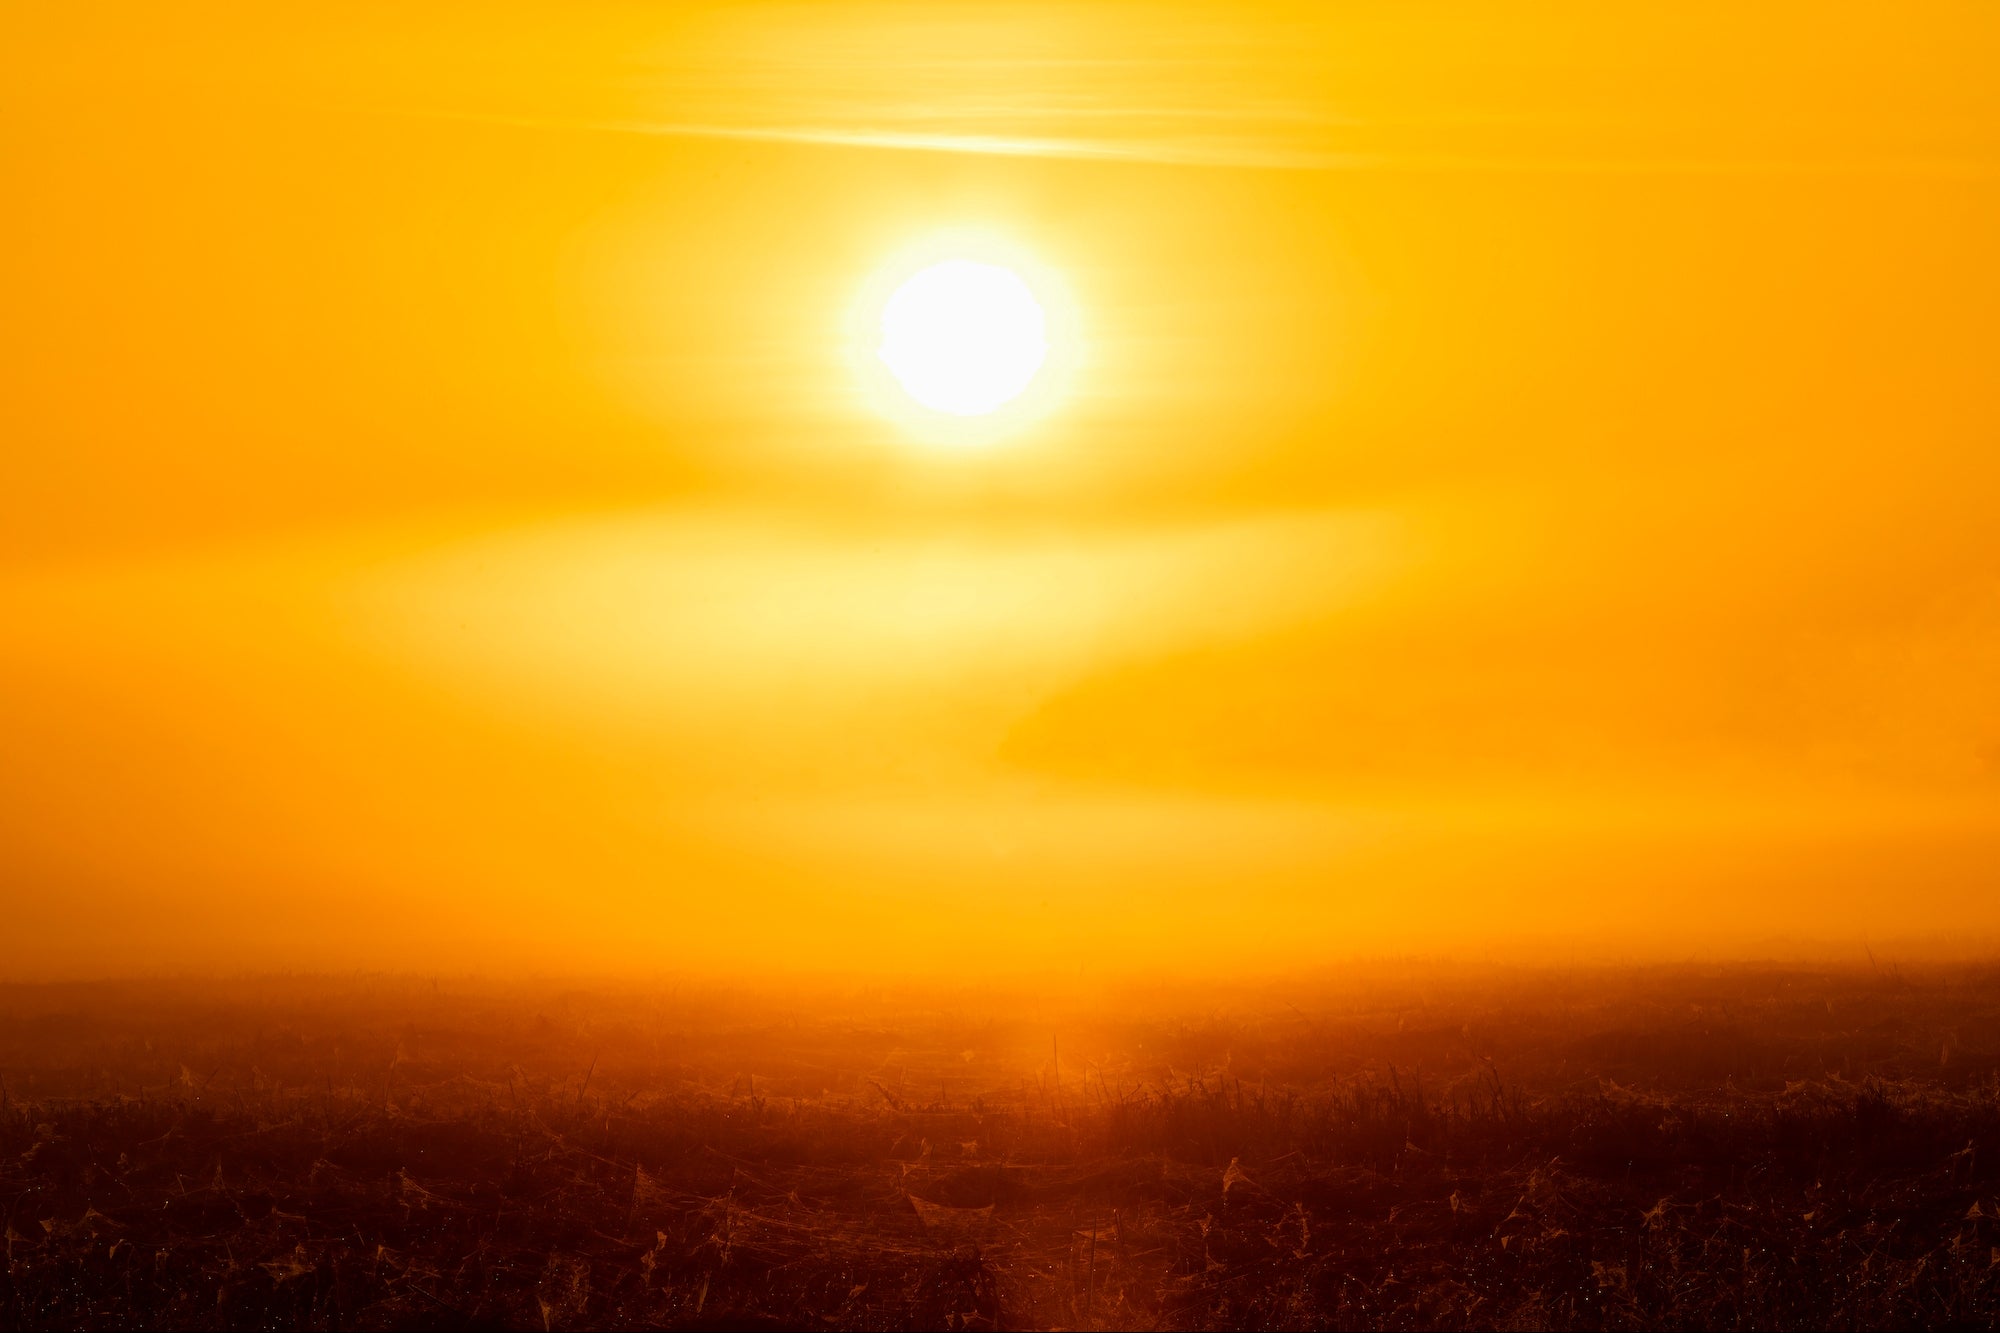 NASA Experts Warn: July This Year Could Be the Hottest in Millennia